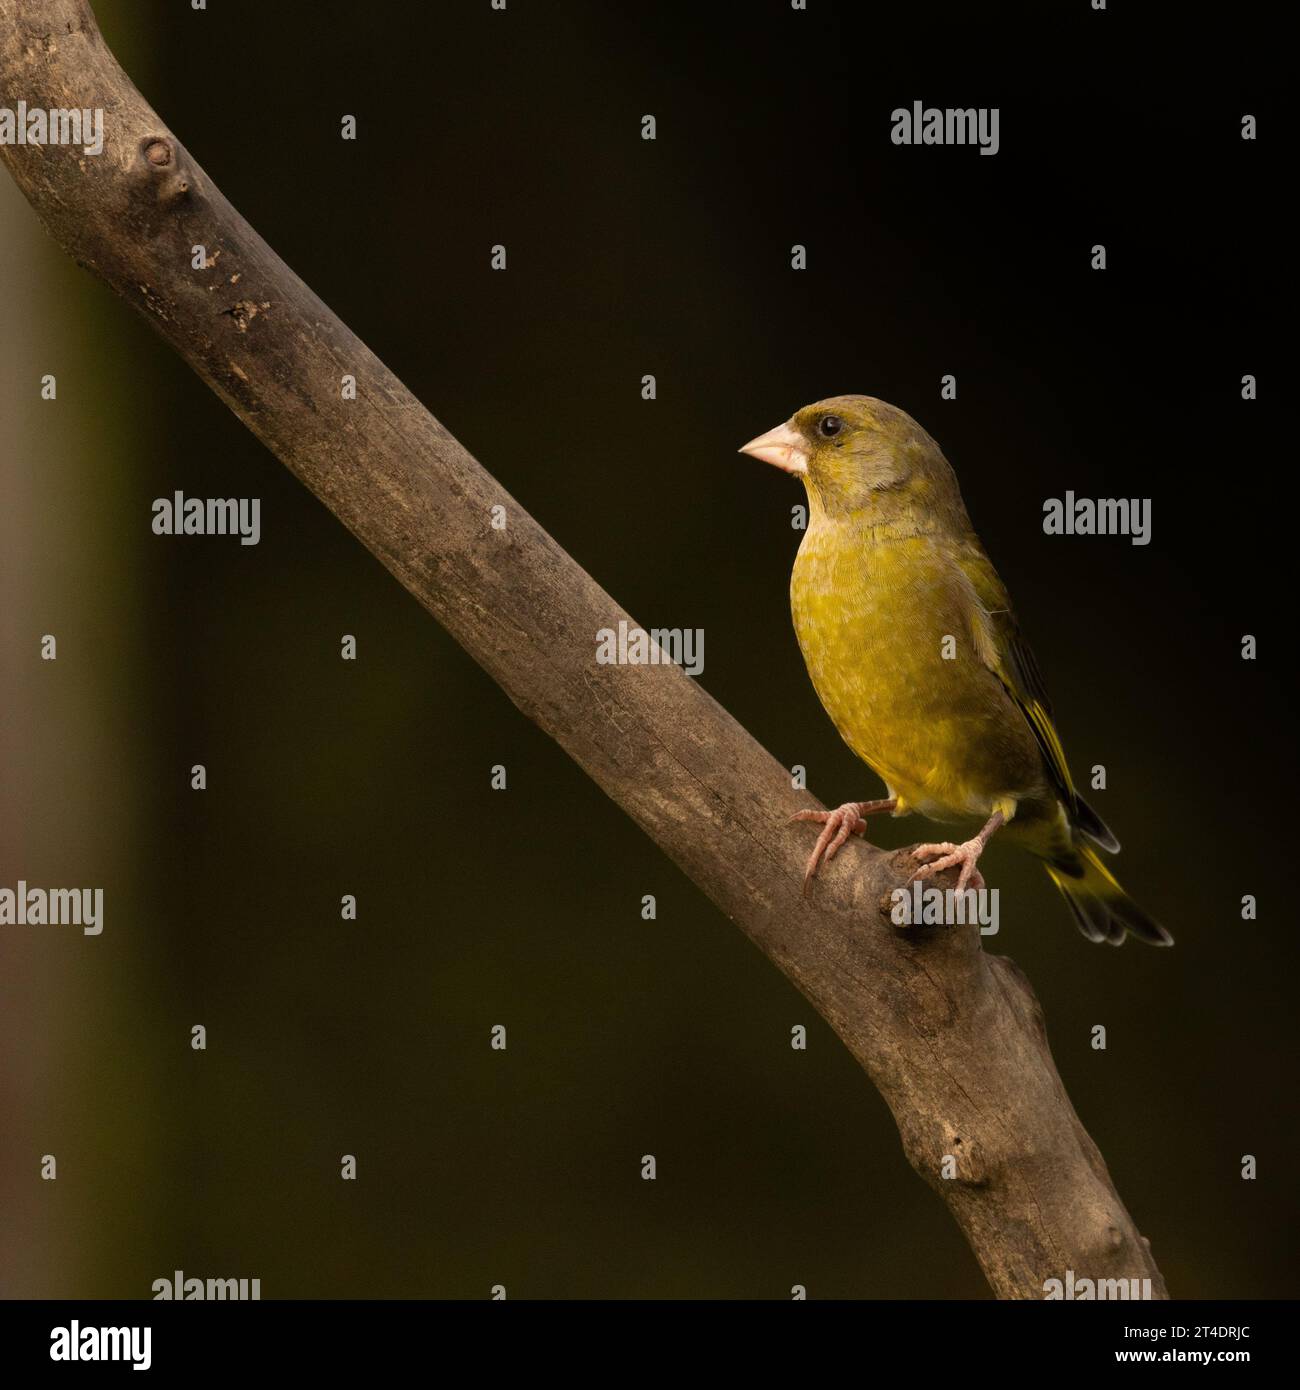 A European greenfinch (Chloris chloris) photographed at Daisy Nook Country Park, Oldham, UK Stock Photo